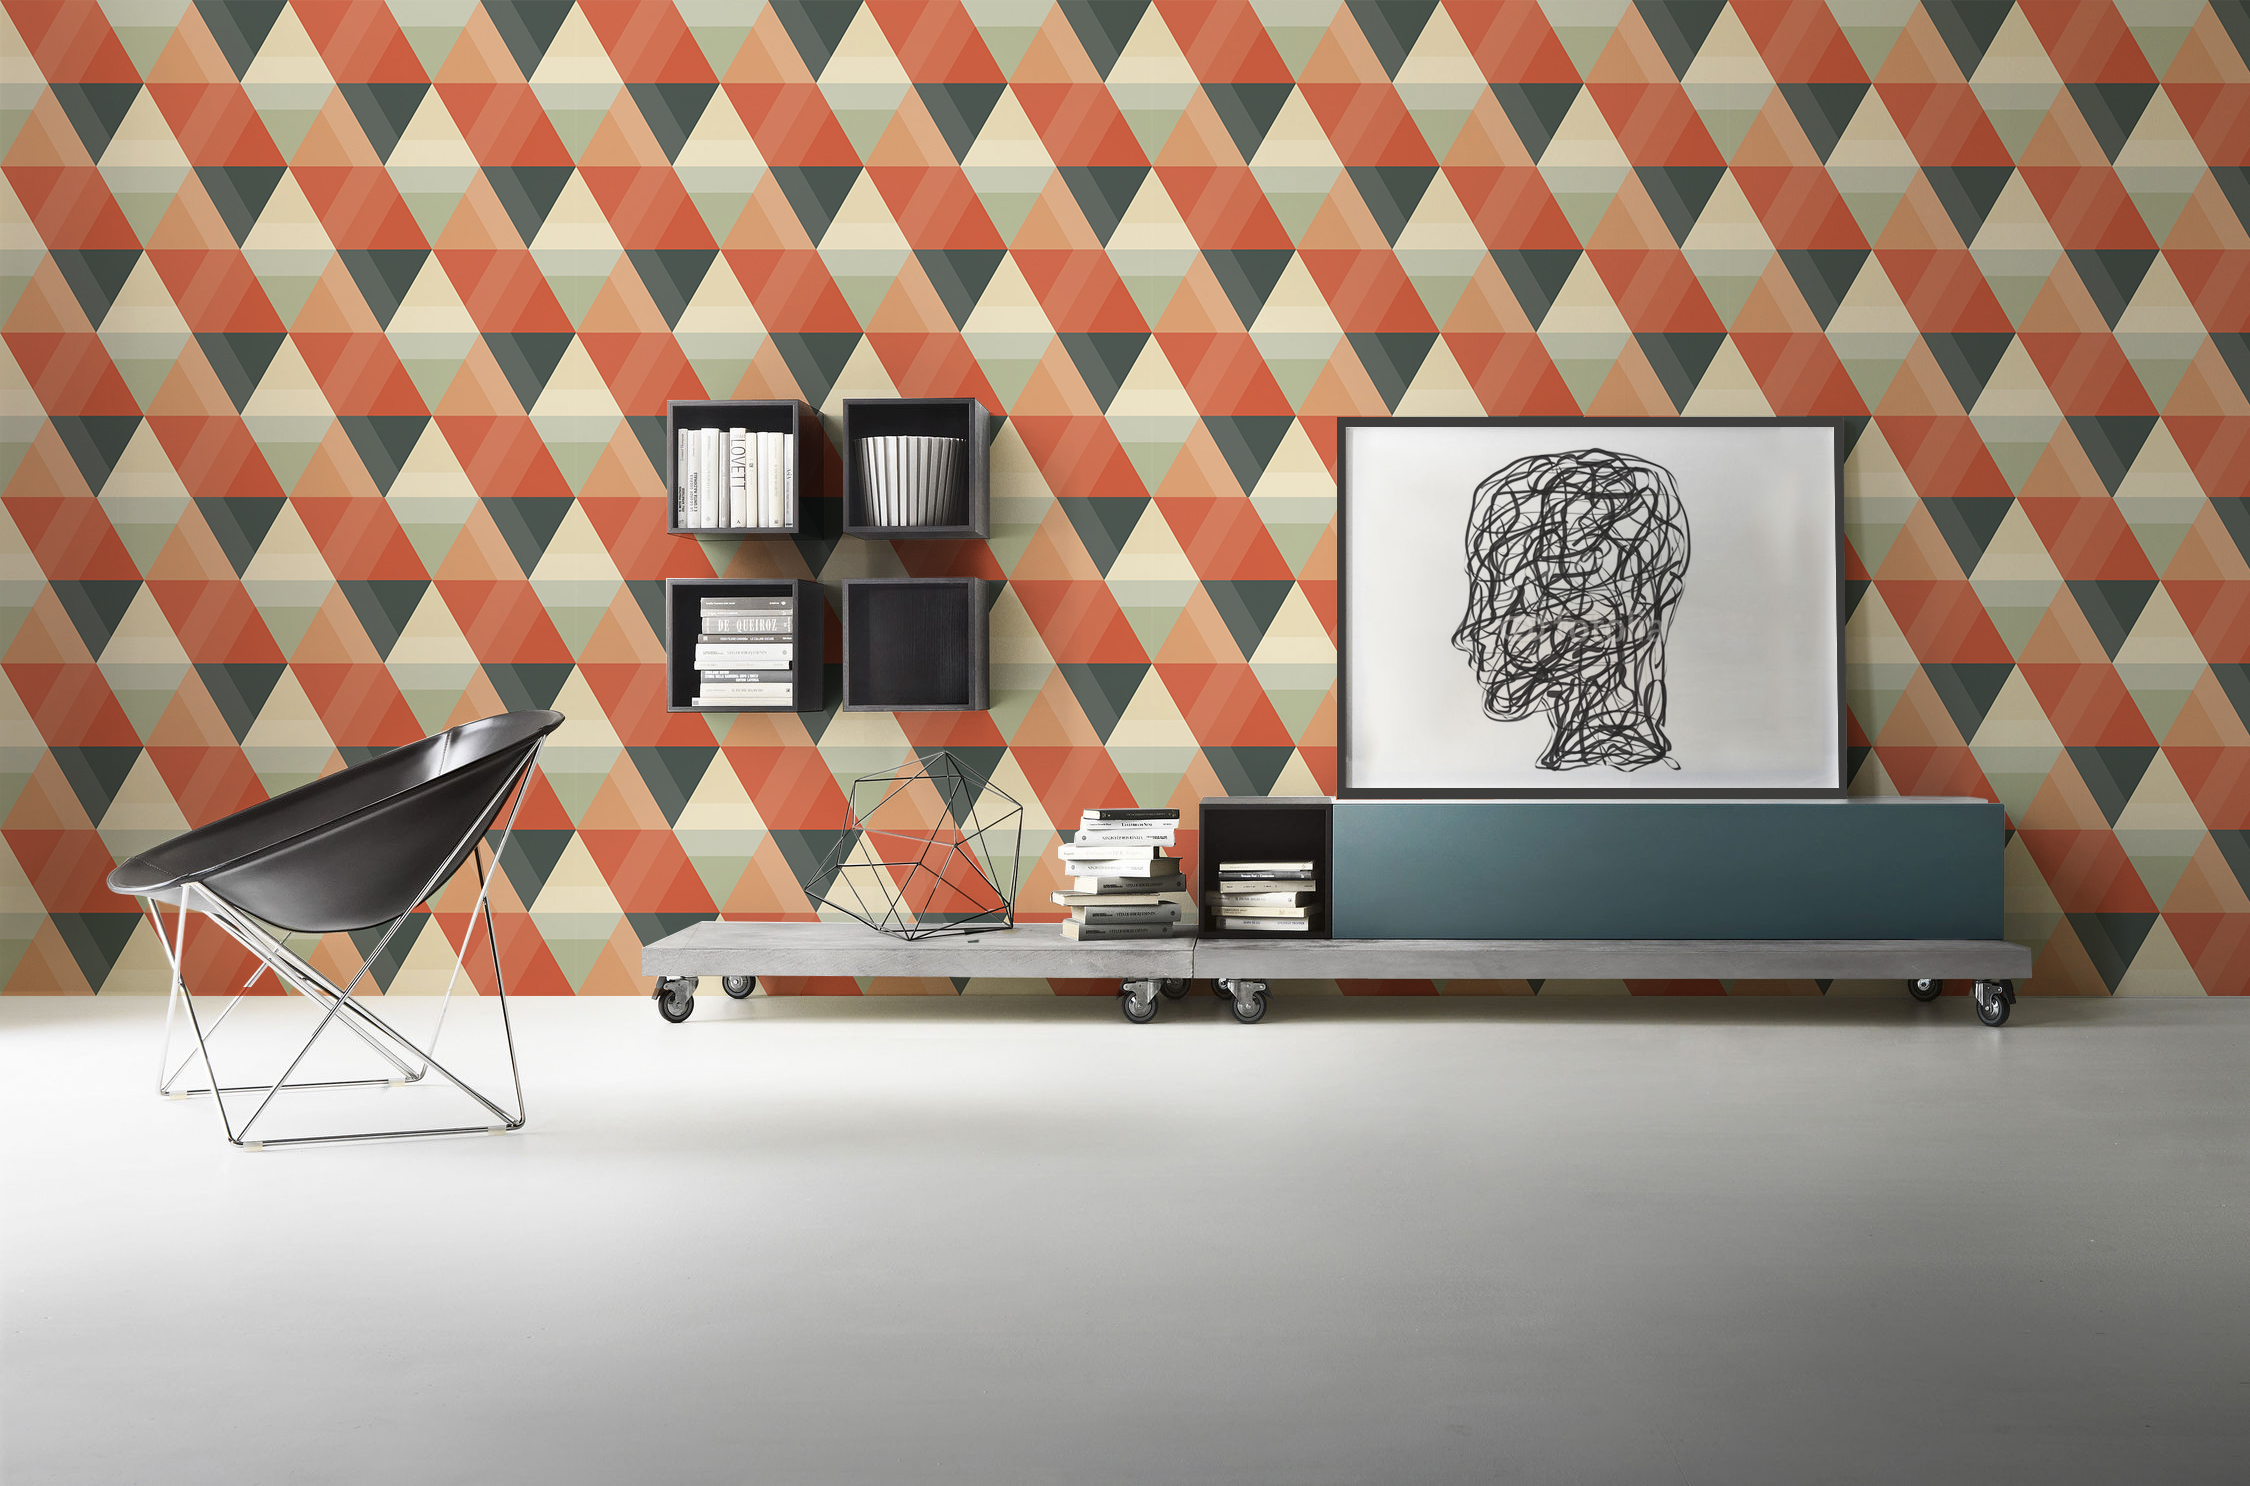 New look • Living room - Contemporary - Art & lifestyle - Textures and patterns - Wall Murals - Posters